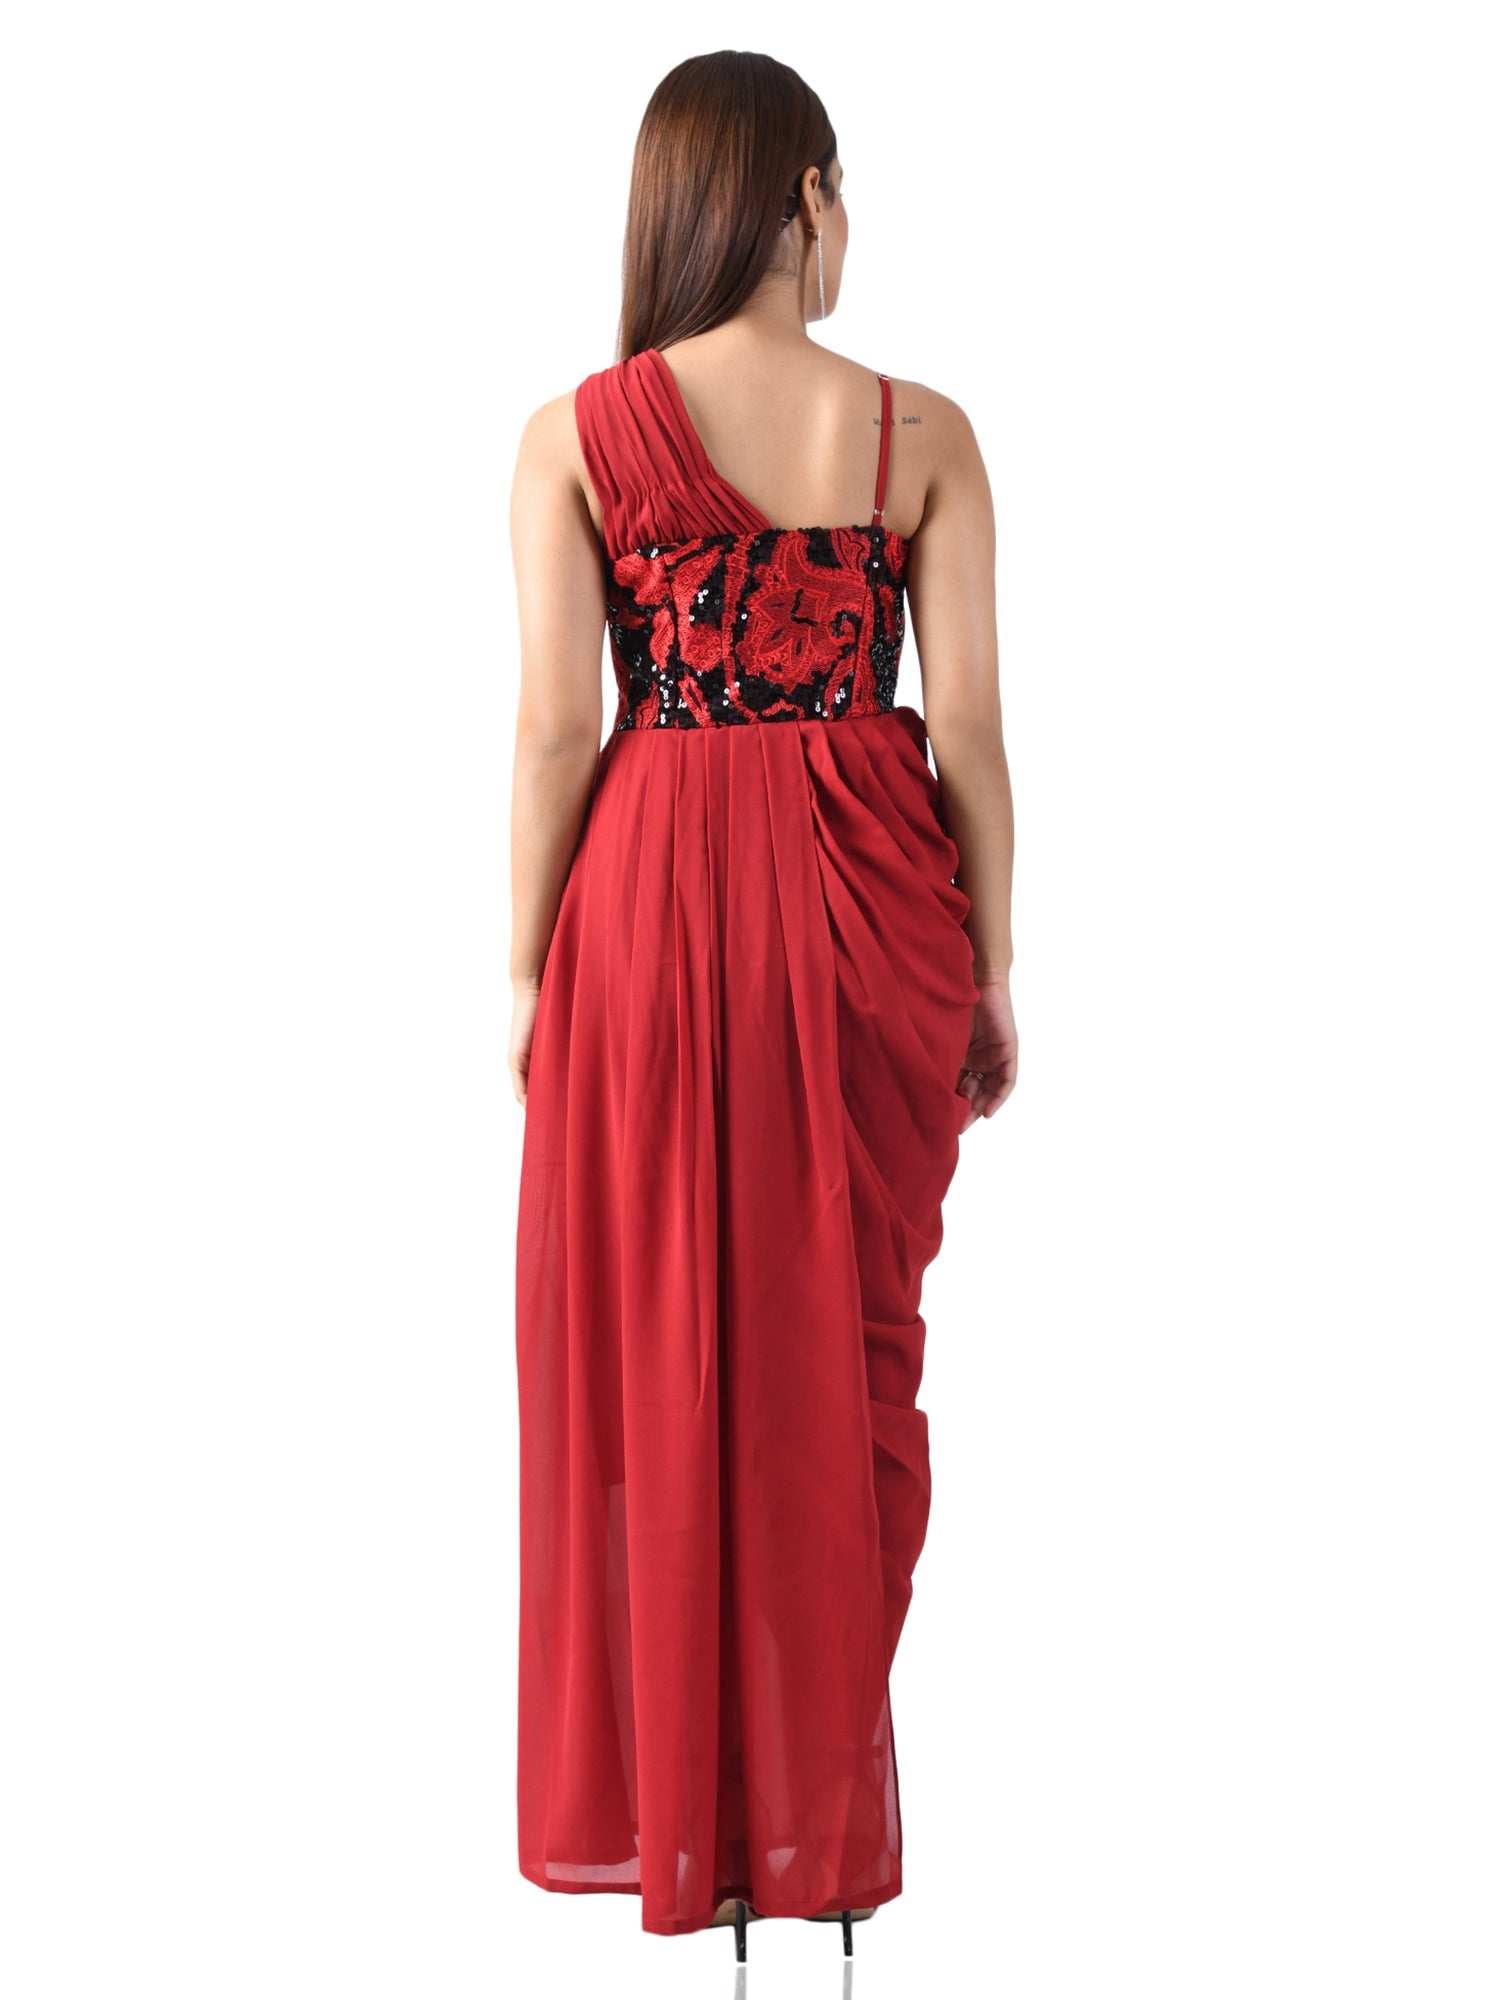 paola embroired corset red draped dress